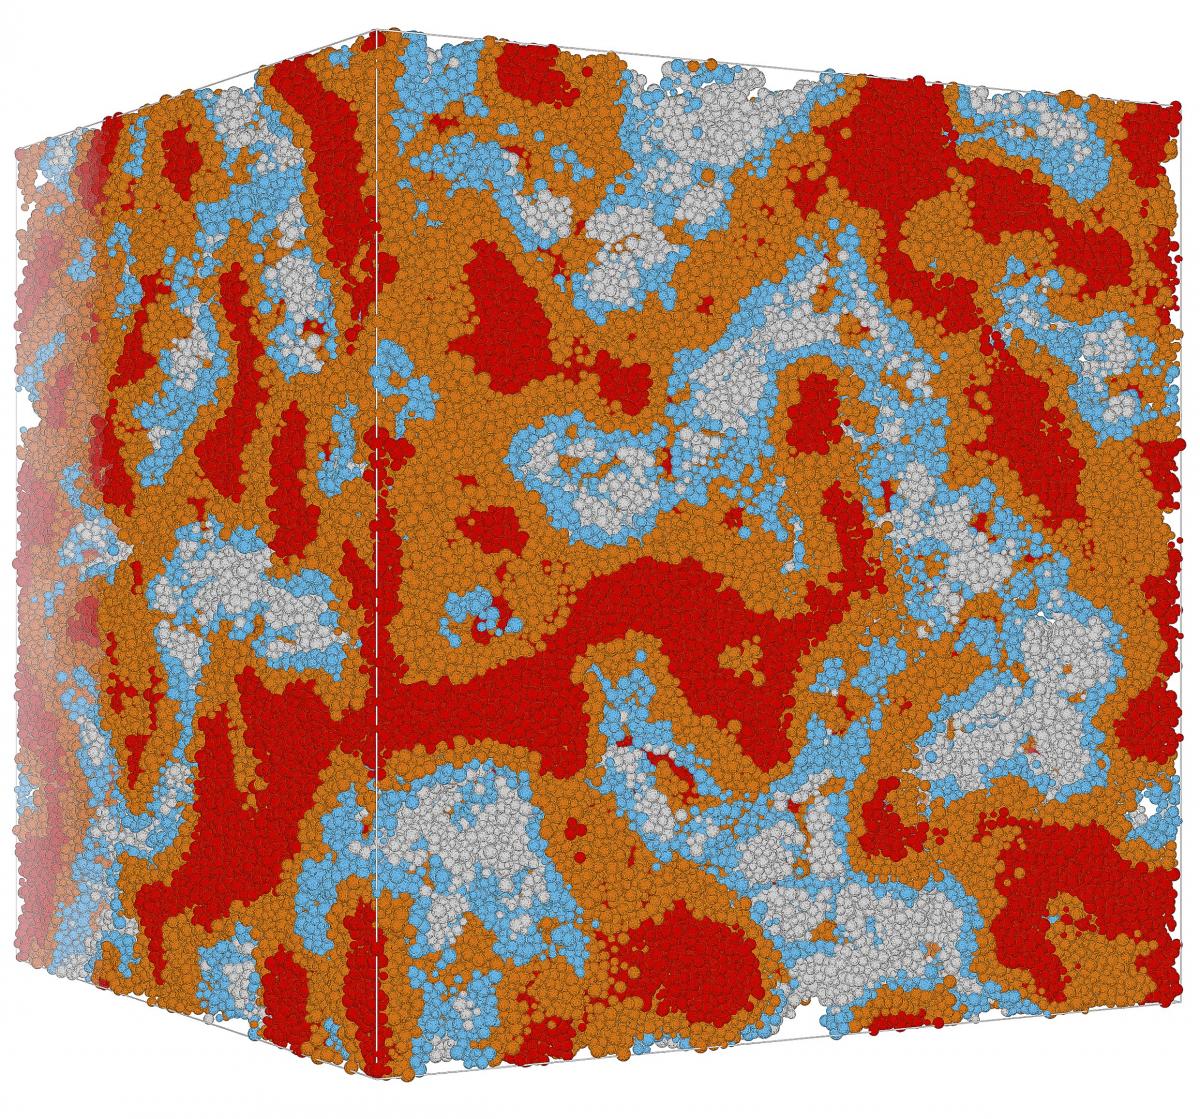 Snapshot of numerical simulations of cement hydrates, with the colors indicating different local densities.